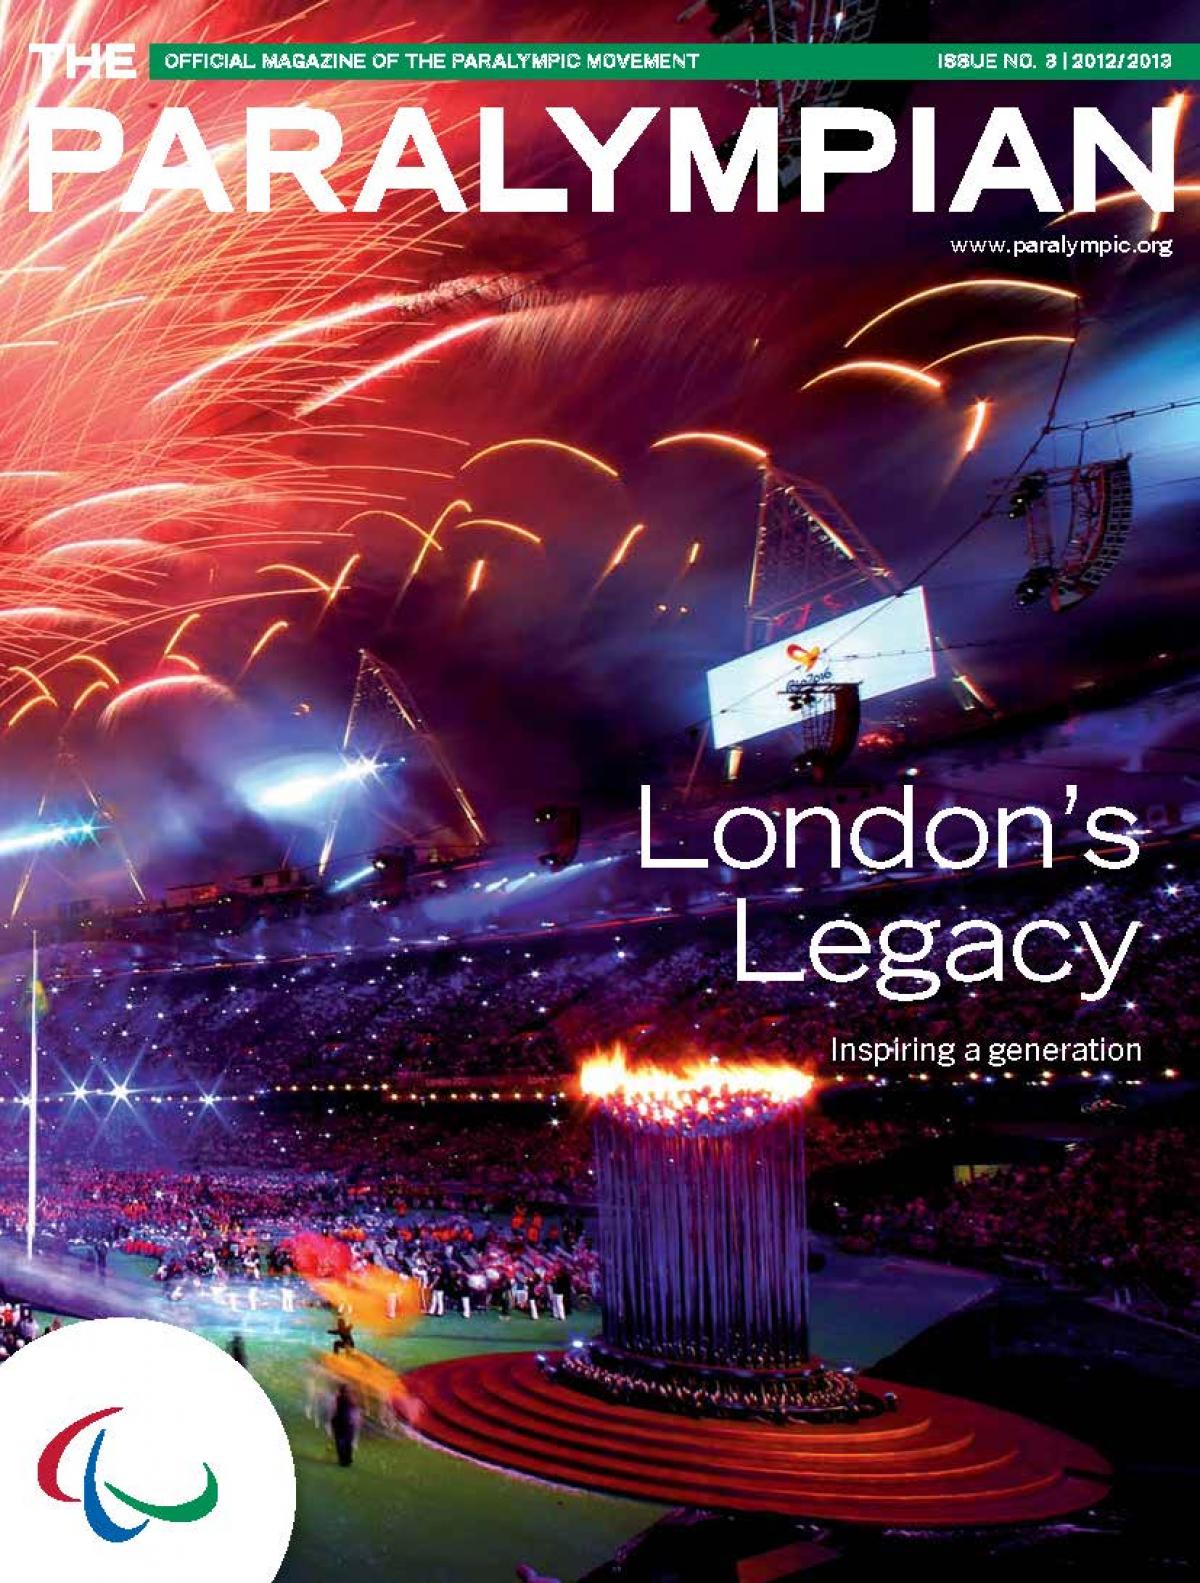 Cover photo of the magazine Paralympian showing fireworks light up the stadium during the closing ceremony at the London 2012 Paralympic Games